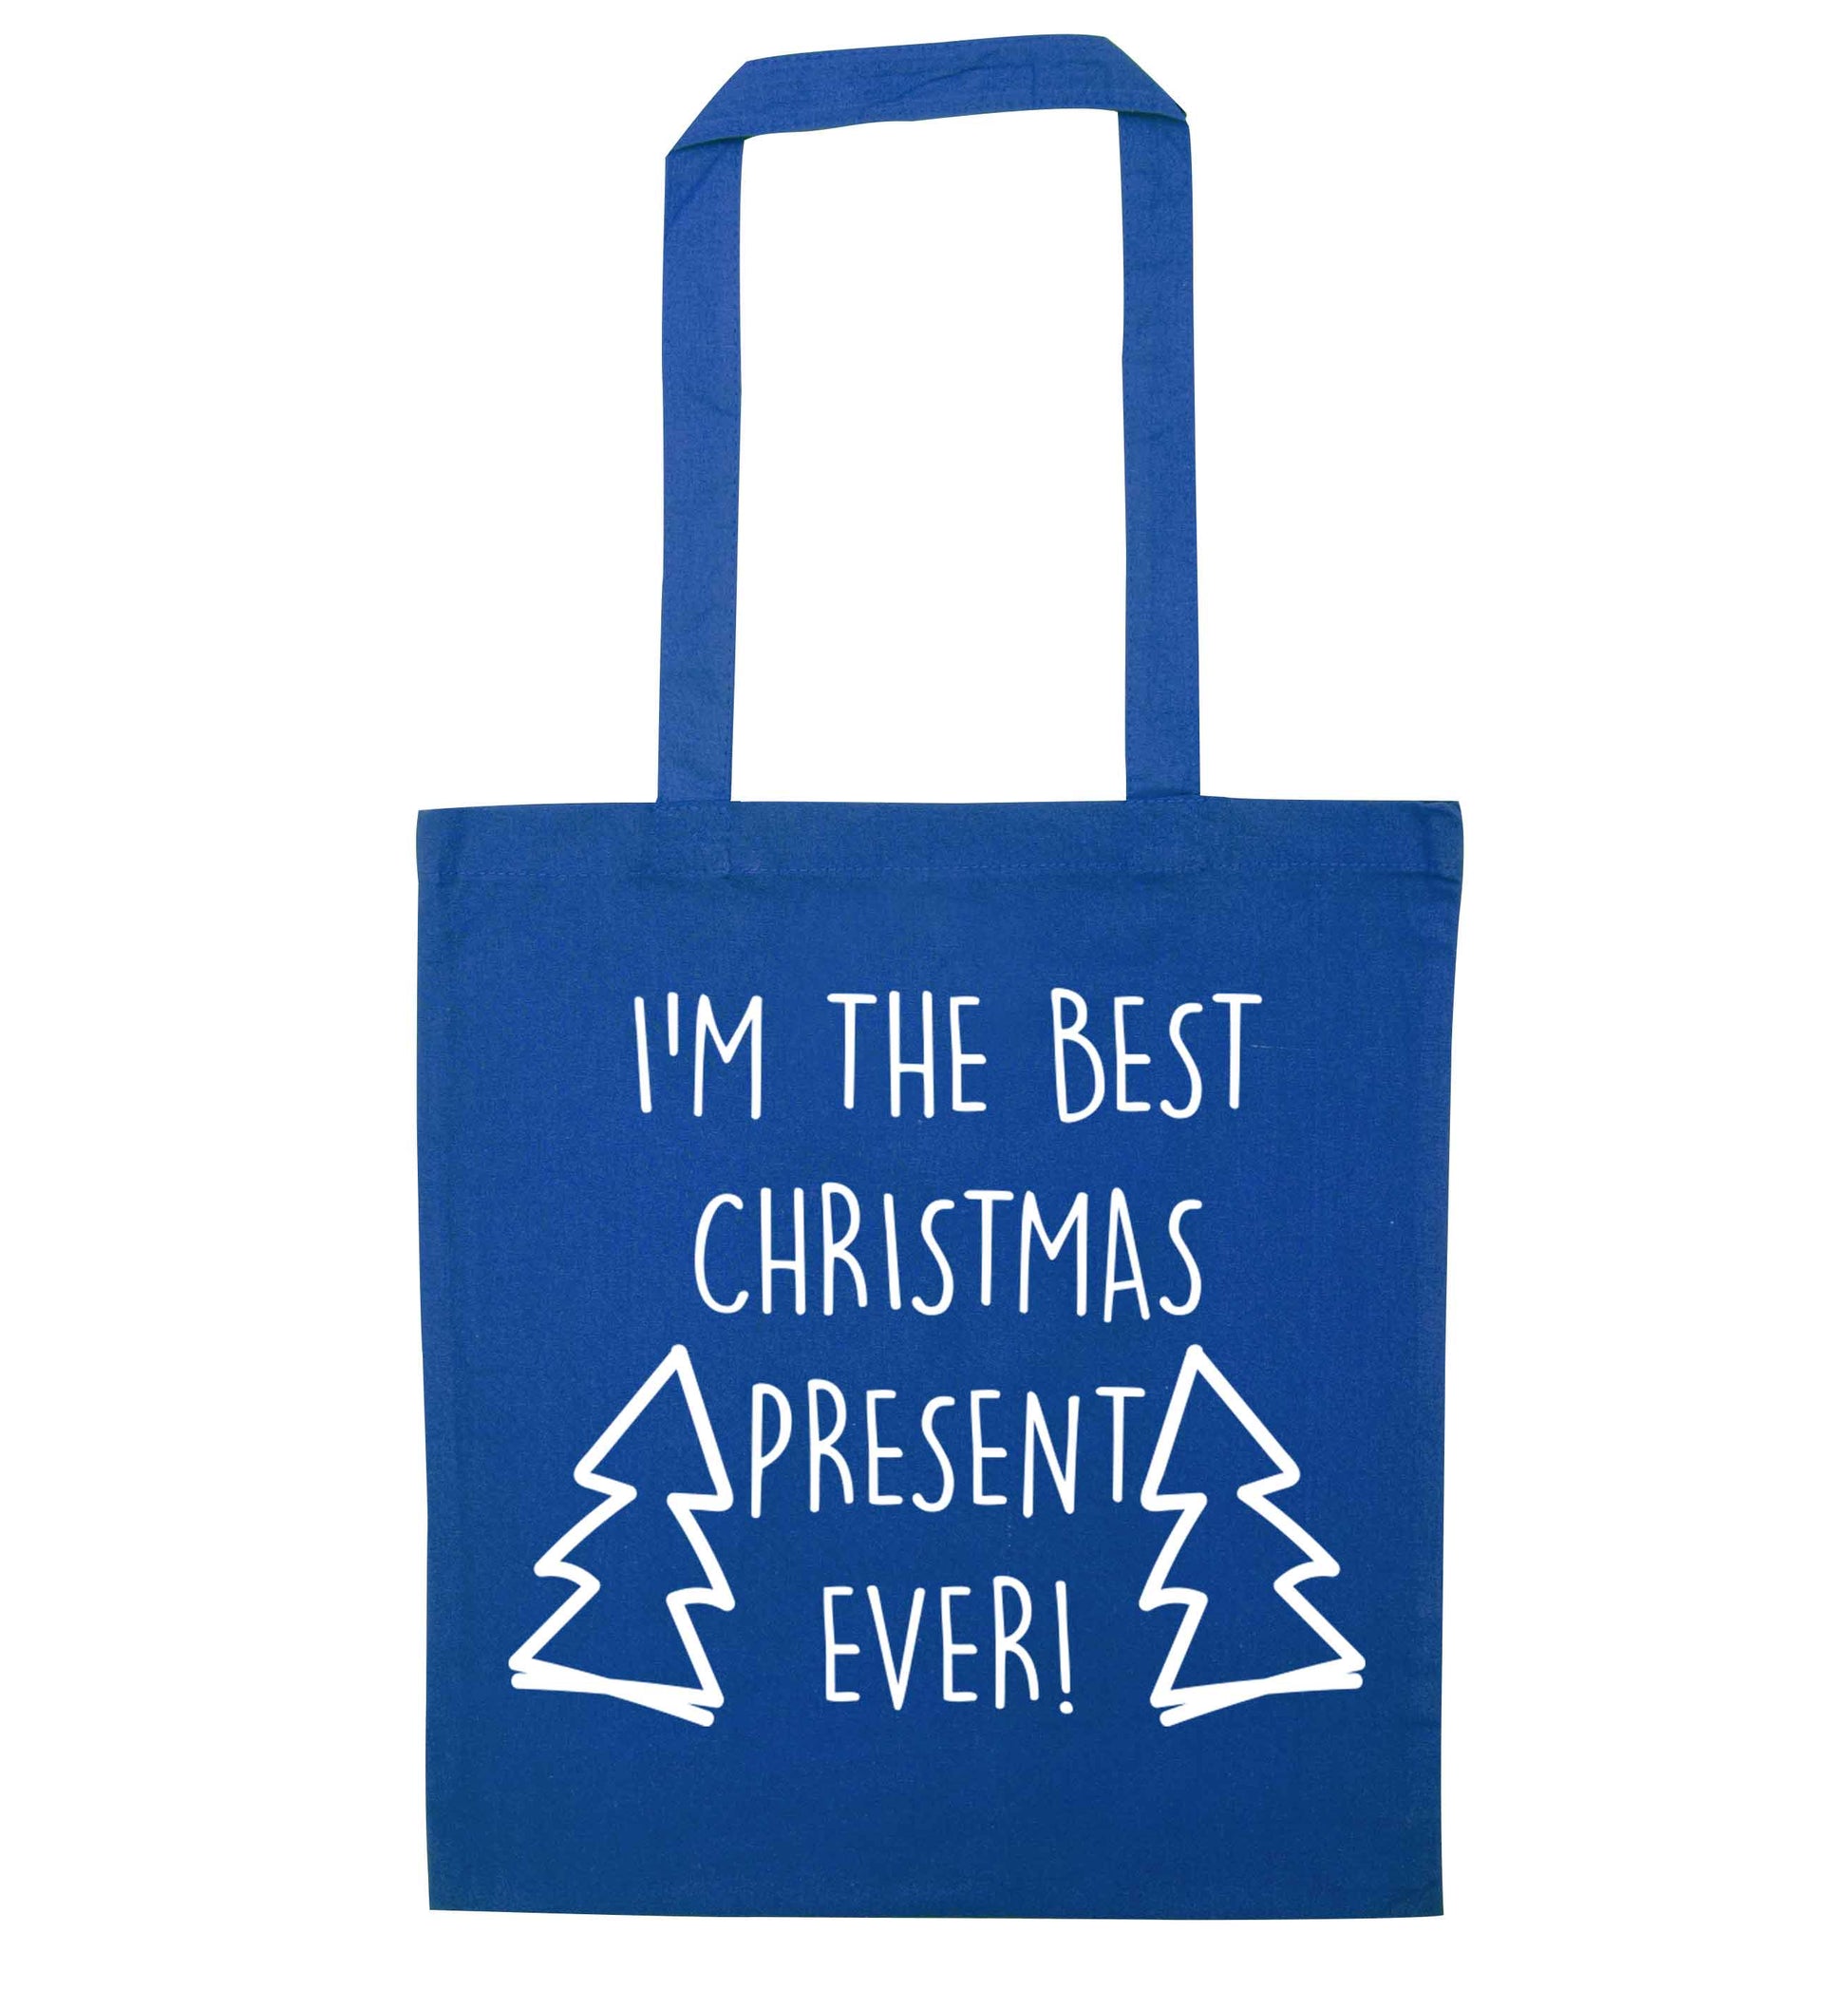 I'm the best Christmas present ever blue tote bag